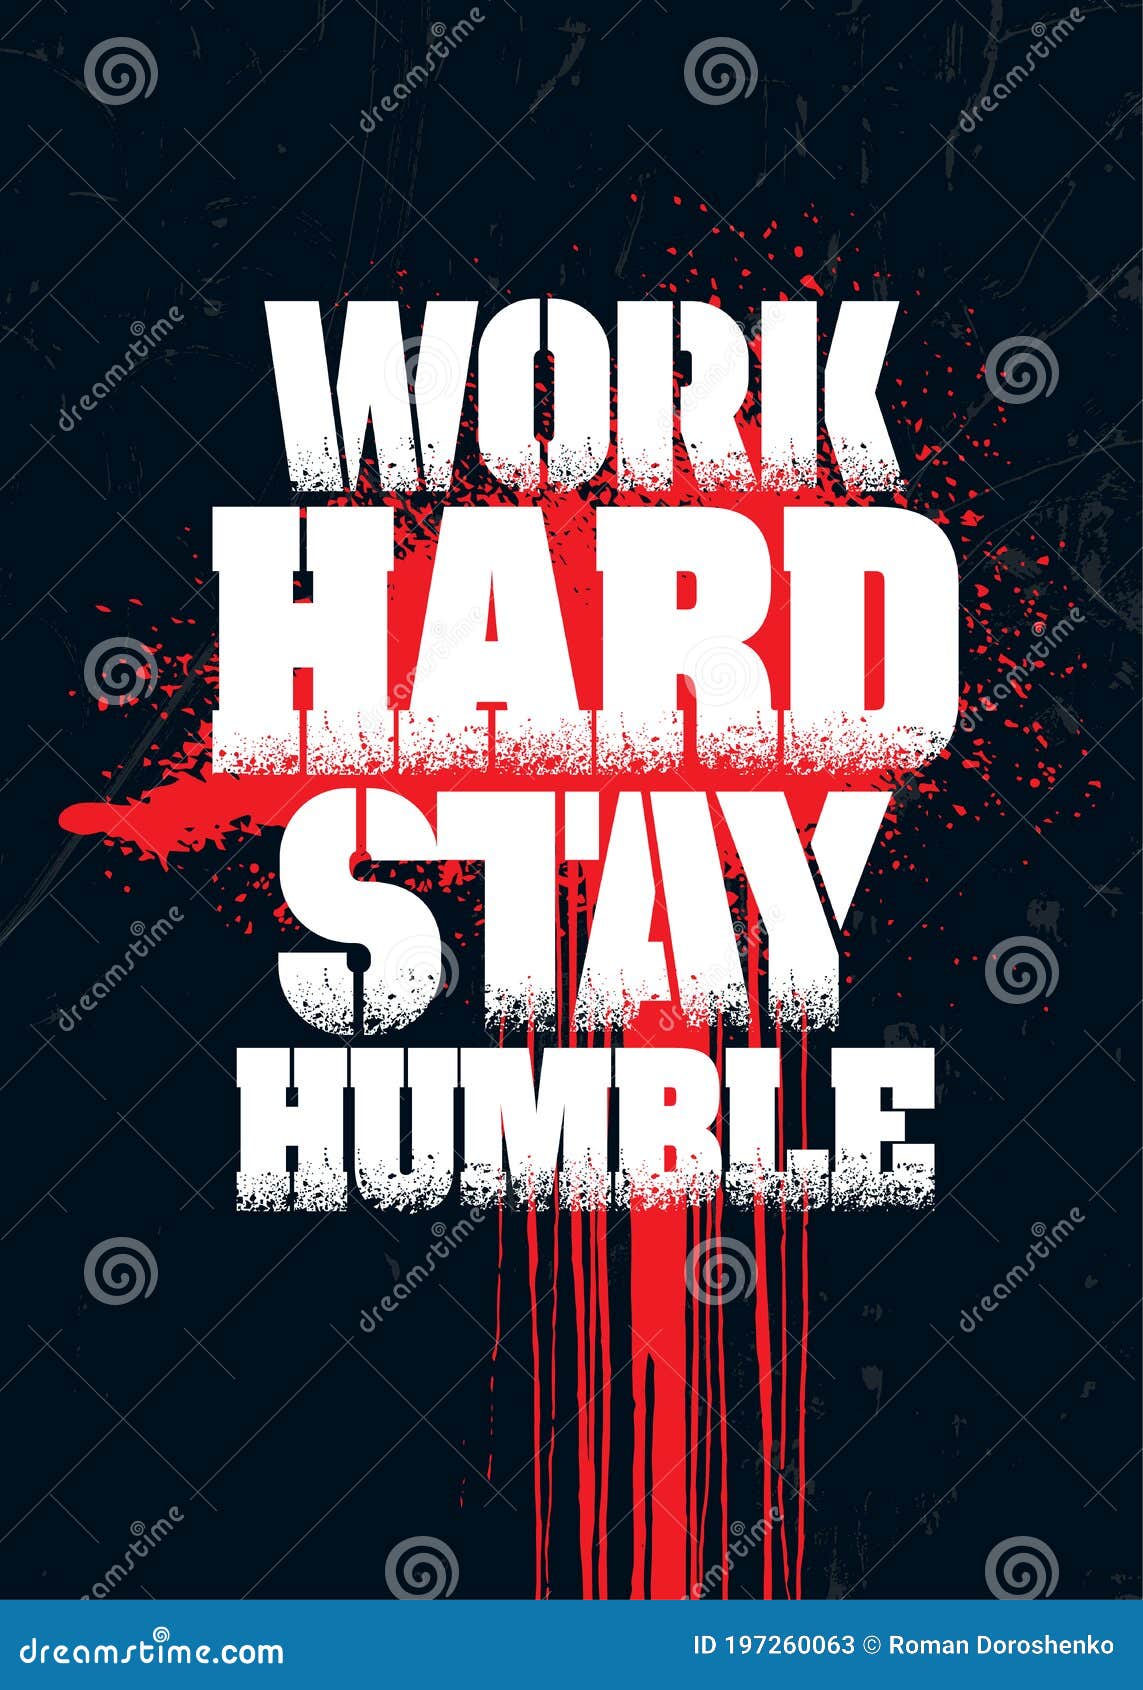 Work Hard Stay Humble Cliparts, Stock Vector and Royalty Free Work Hard Stay  Humble Illustrations